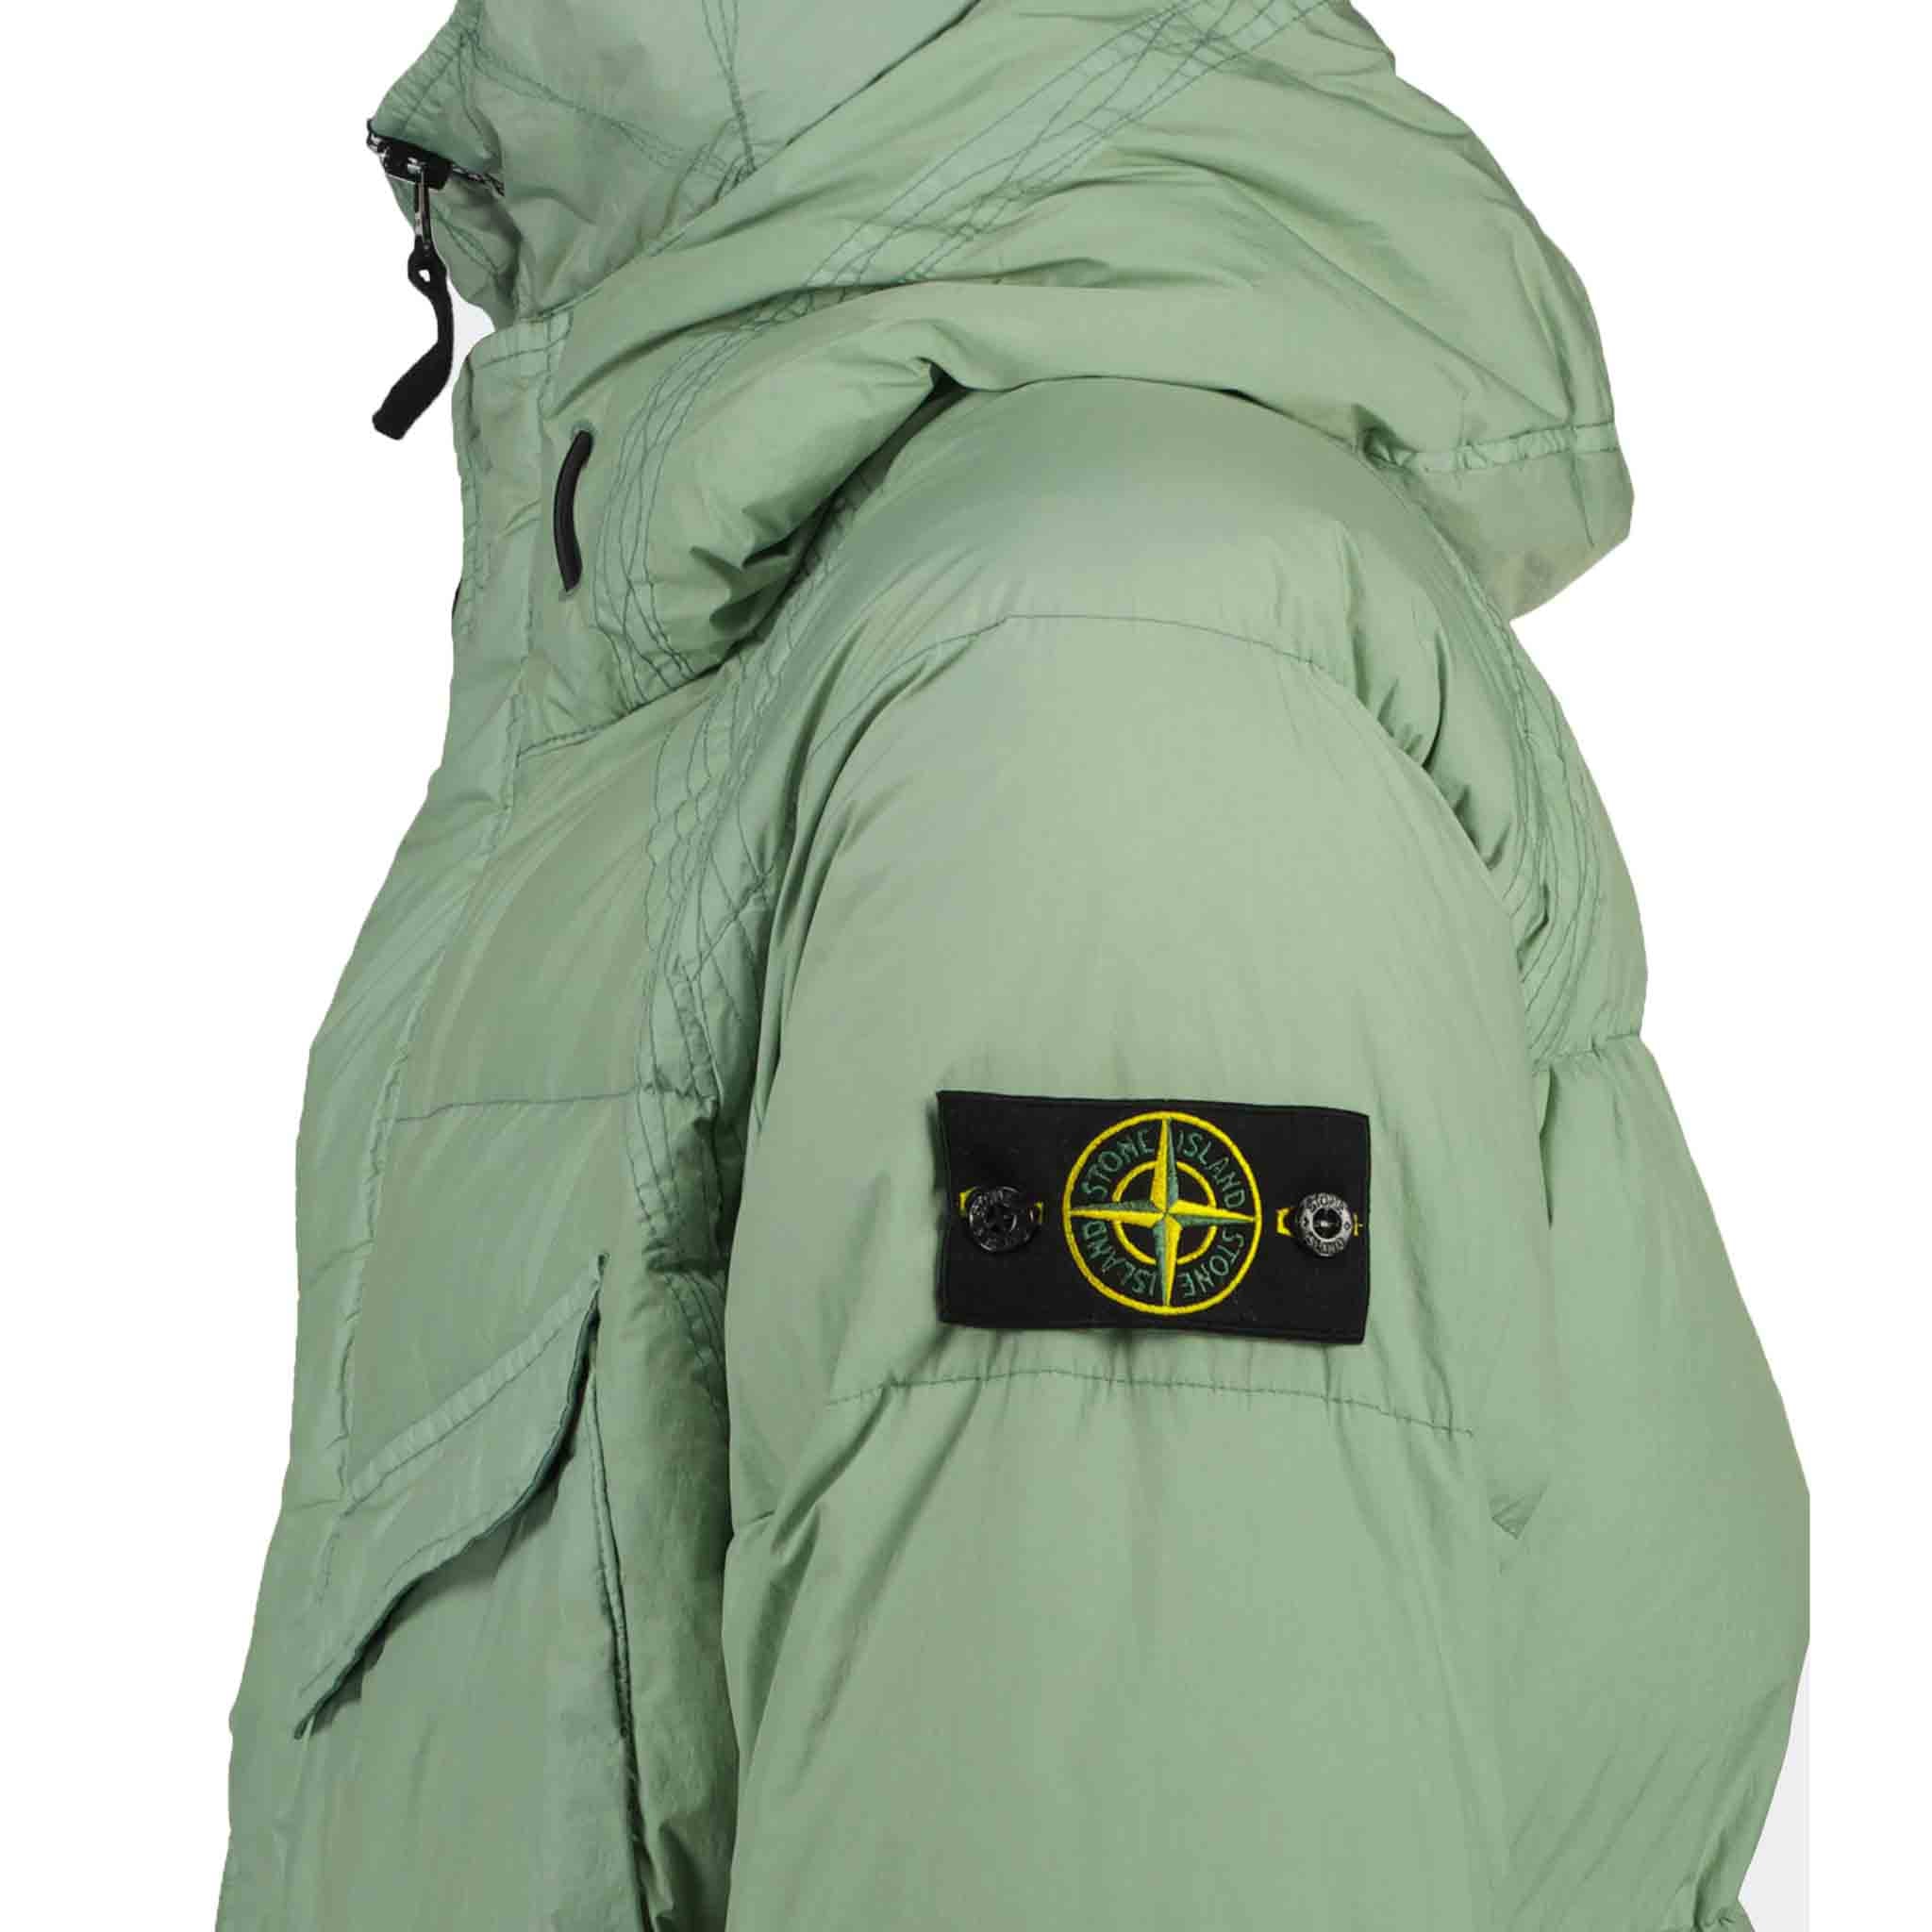 Stone Island Garment Dyed Crinkle Reps NY Down-TC Puffer Shell Jacket in Sage Green